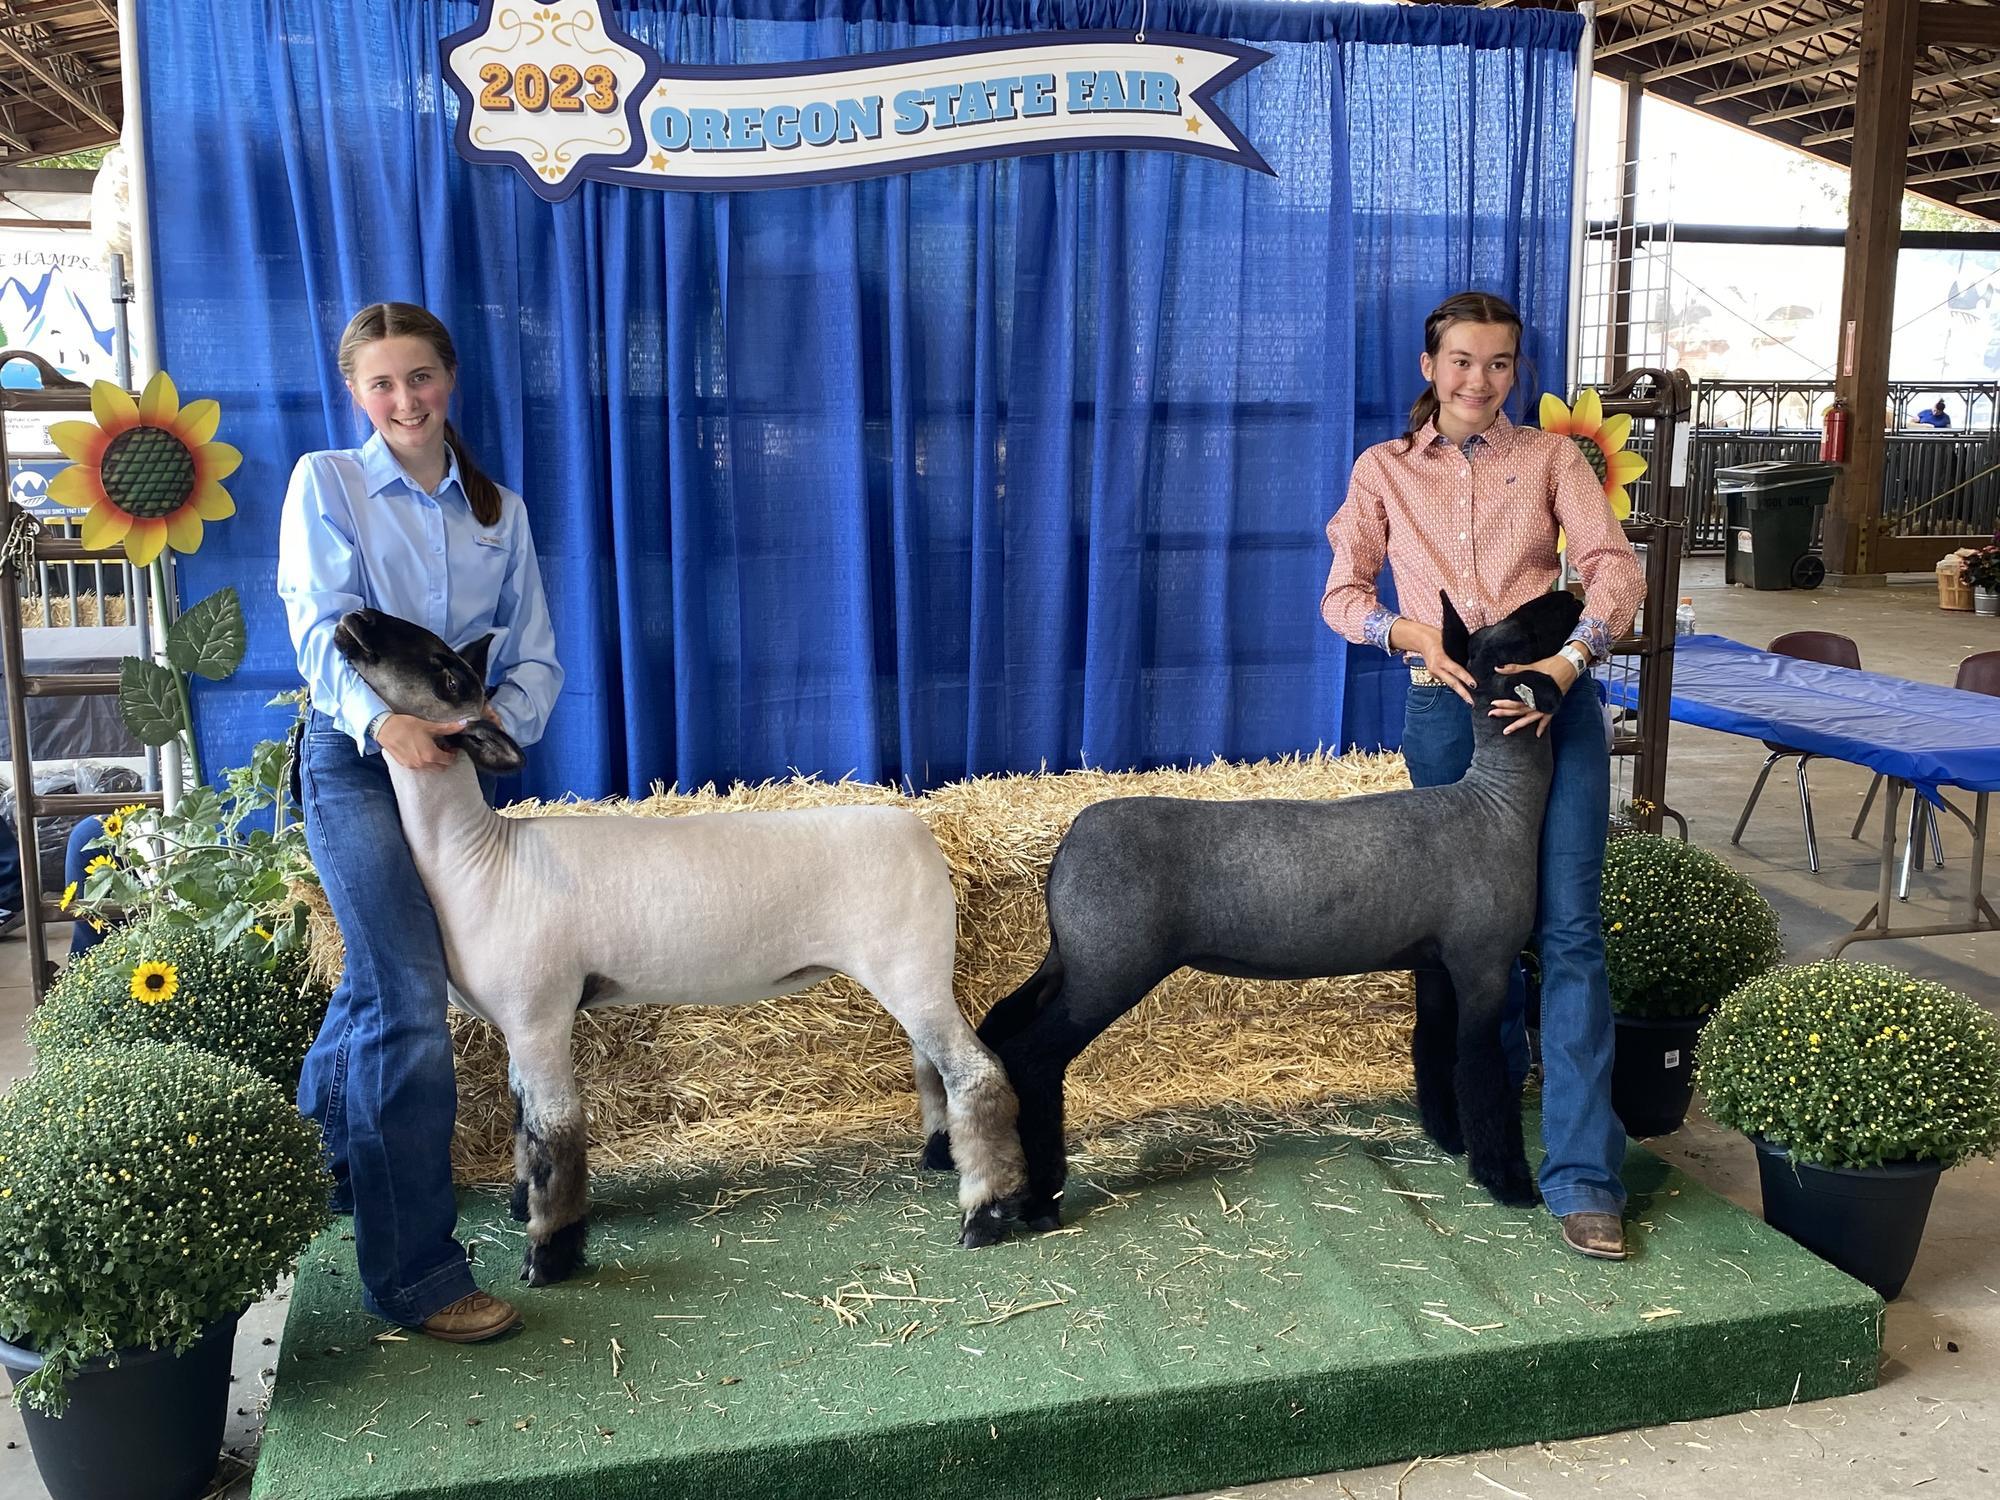 Showing at Oregon State Fair 2023